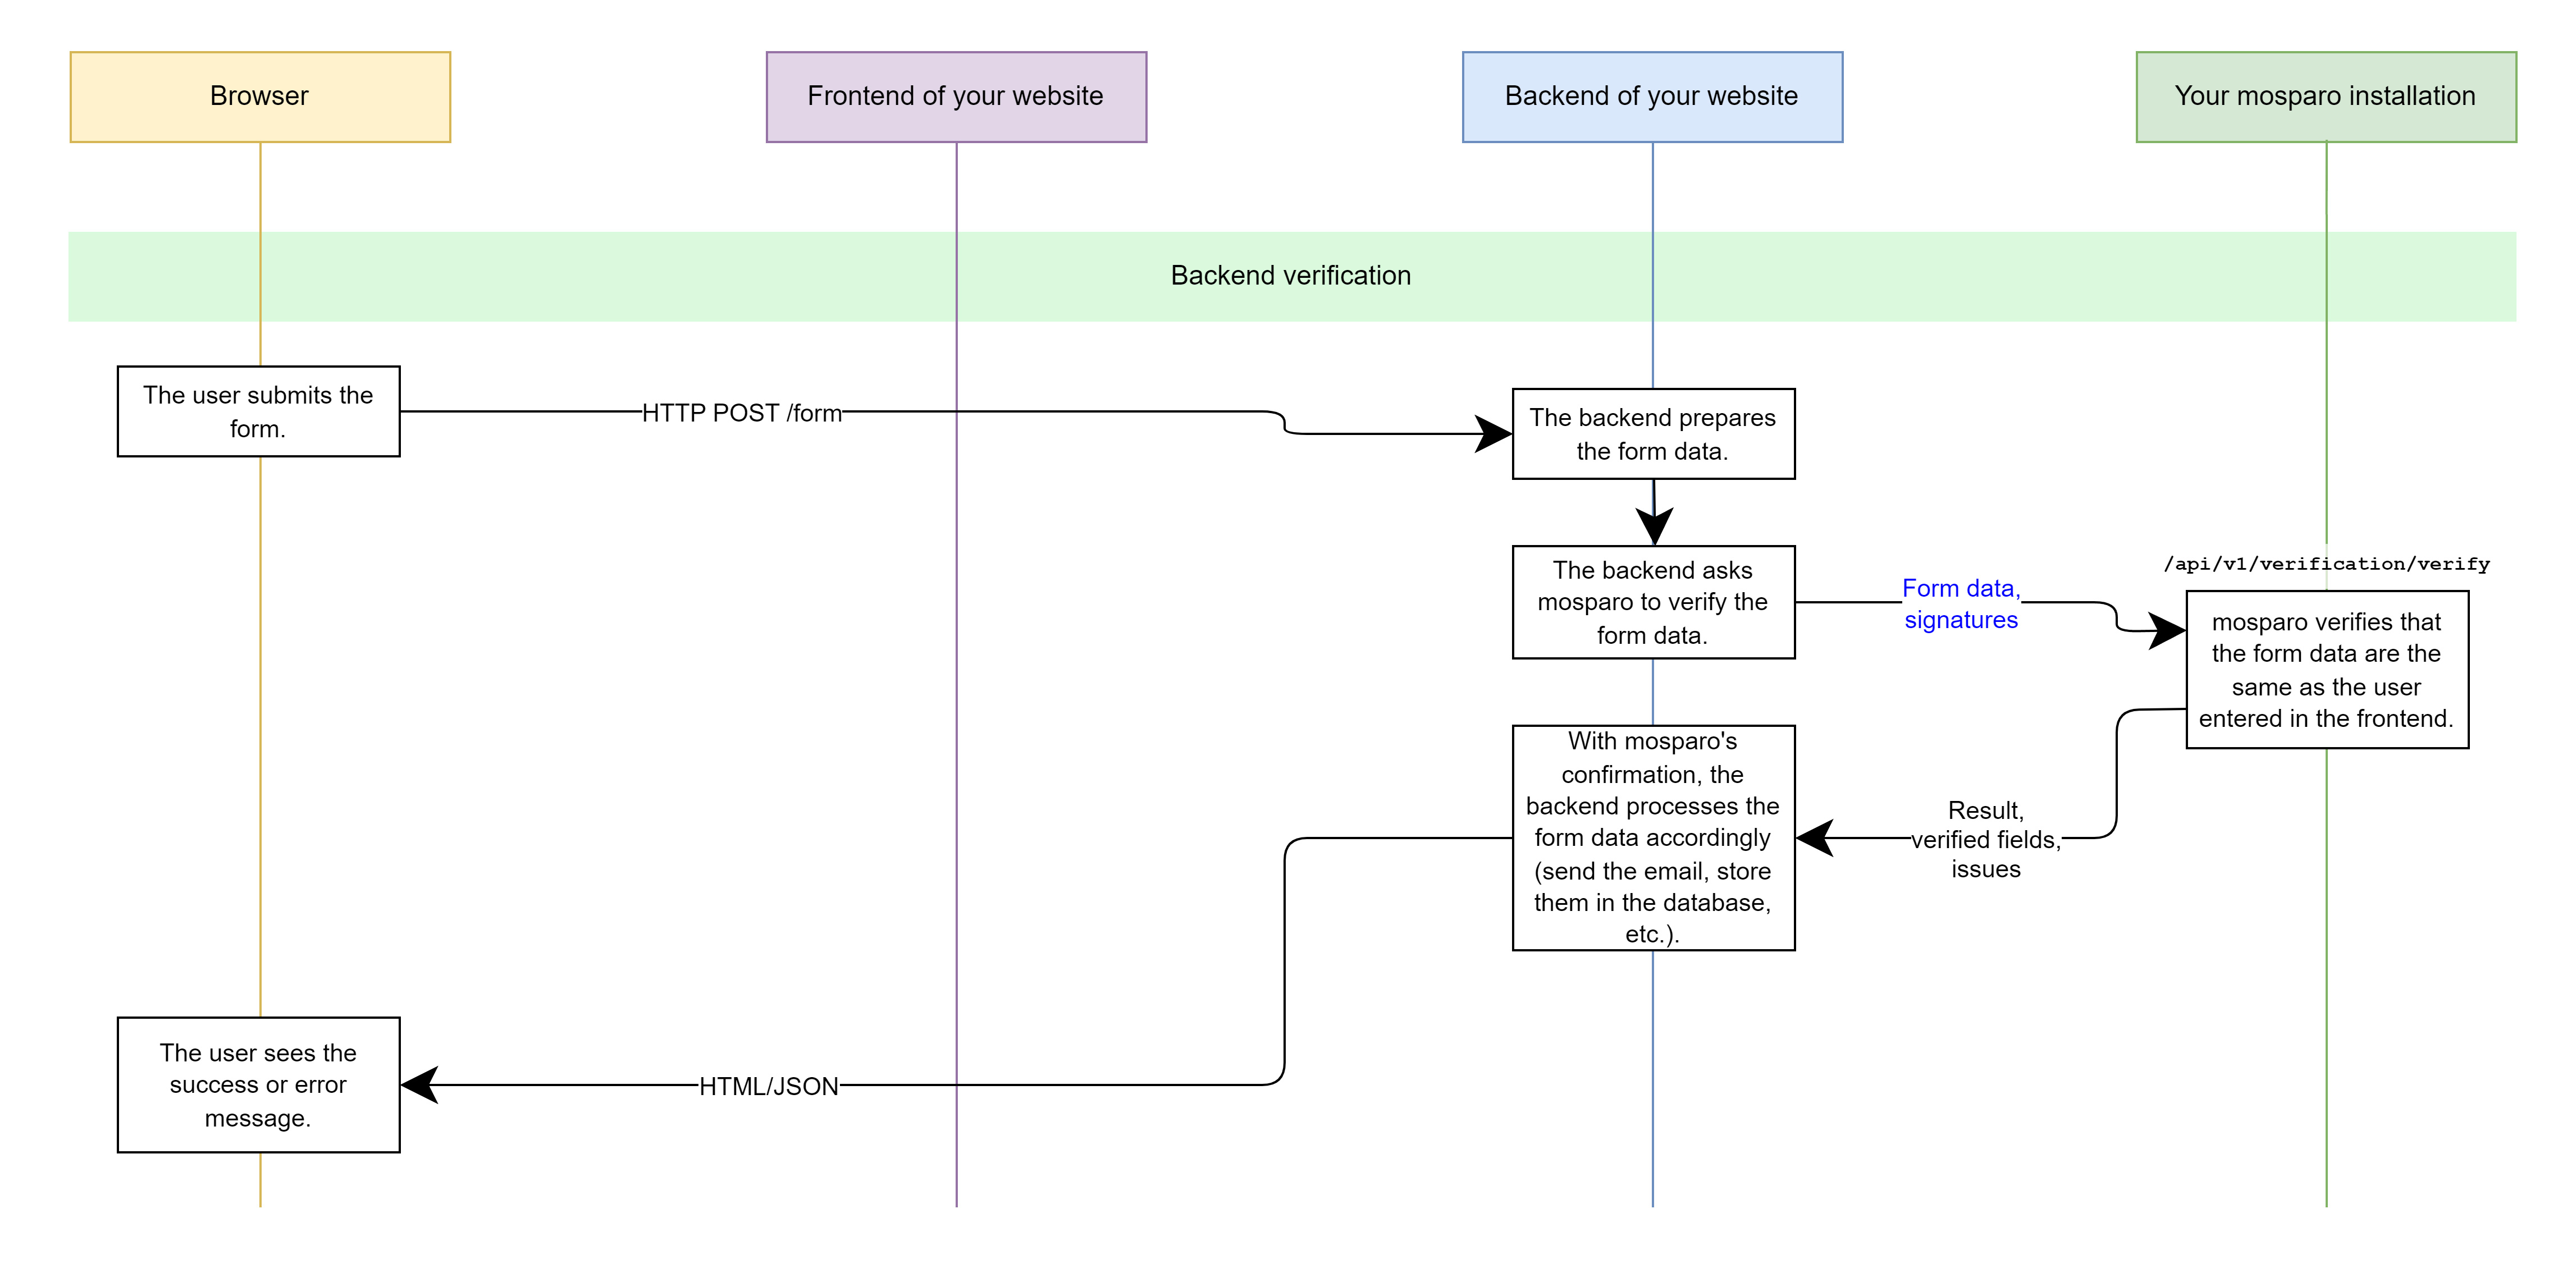 The chart shows the process for the verification as described in the text below.